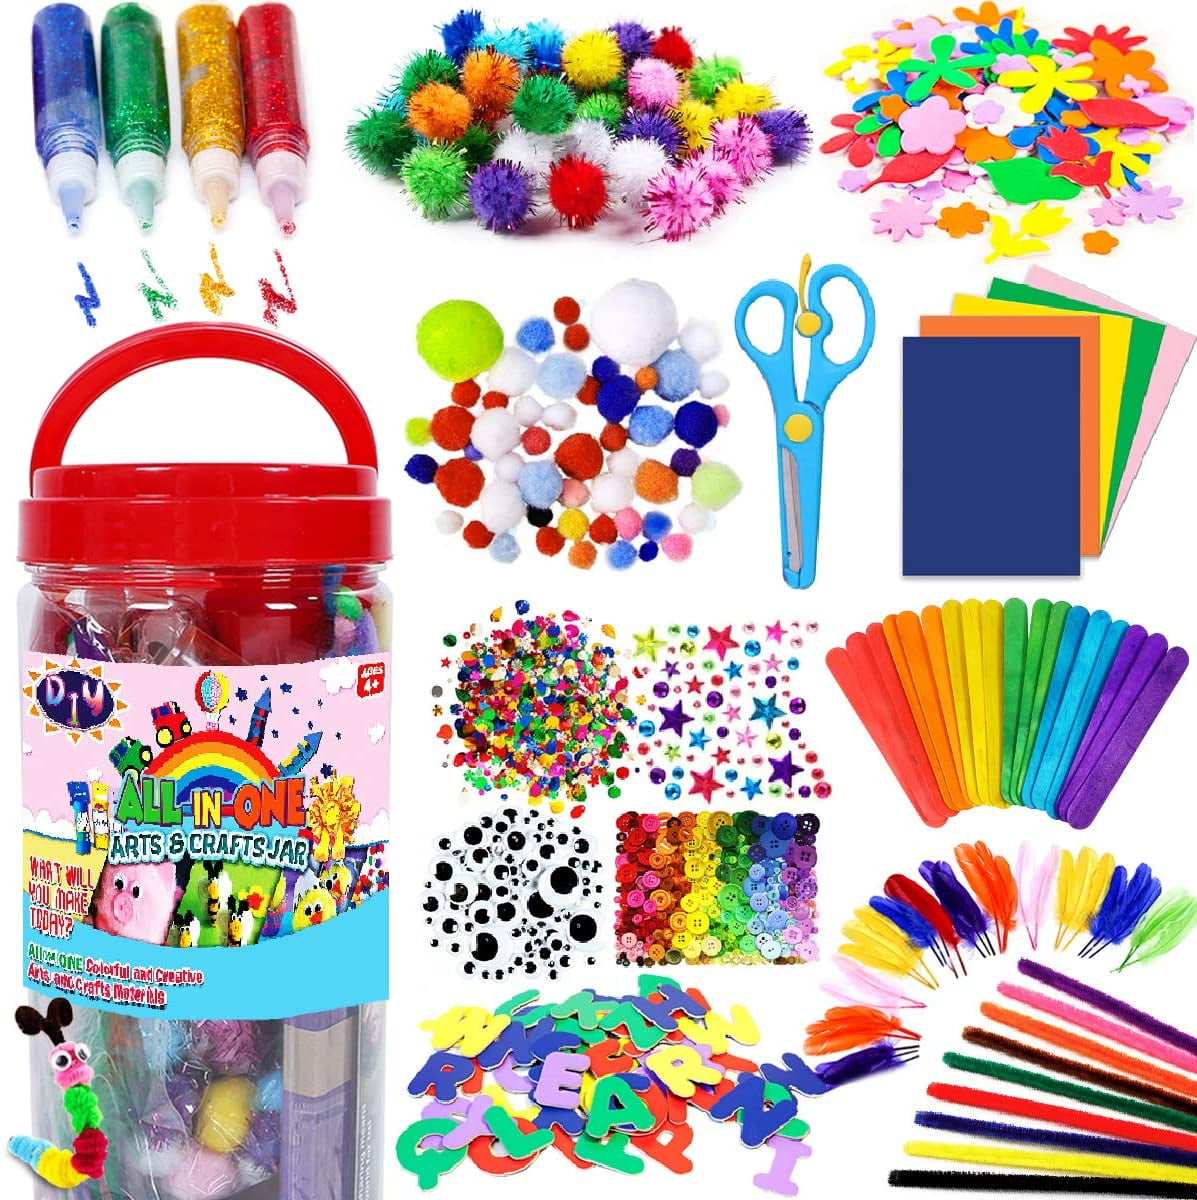 Assorted Arts and Crafts Supplies for Kids Girls Ages 6 7 8 9 10 Letter Beads Pipe Cleaners Pom Poms,Glue,Sticks,Wiggle Googly Eyes,All in One Toddler Crafts Set for School Projects DIY Activities